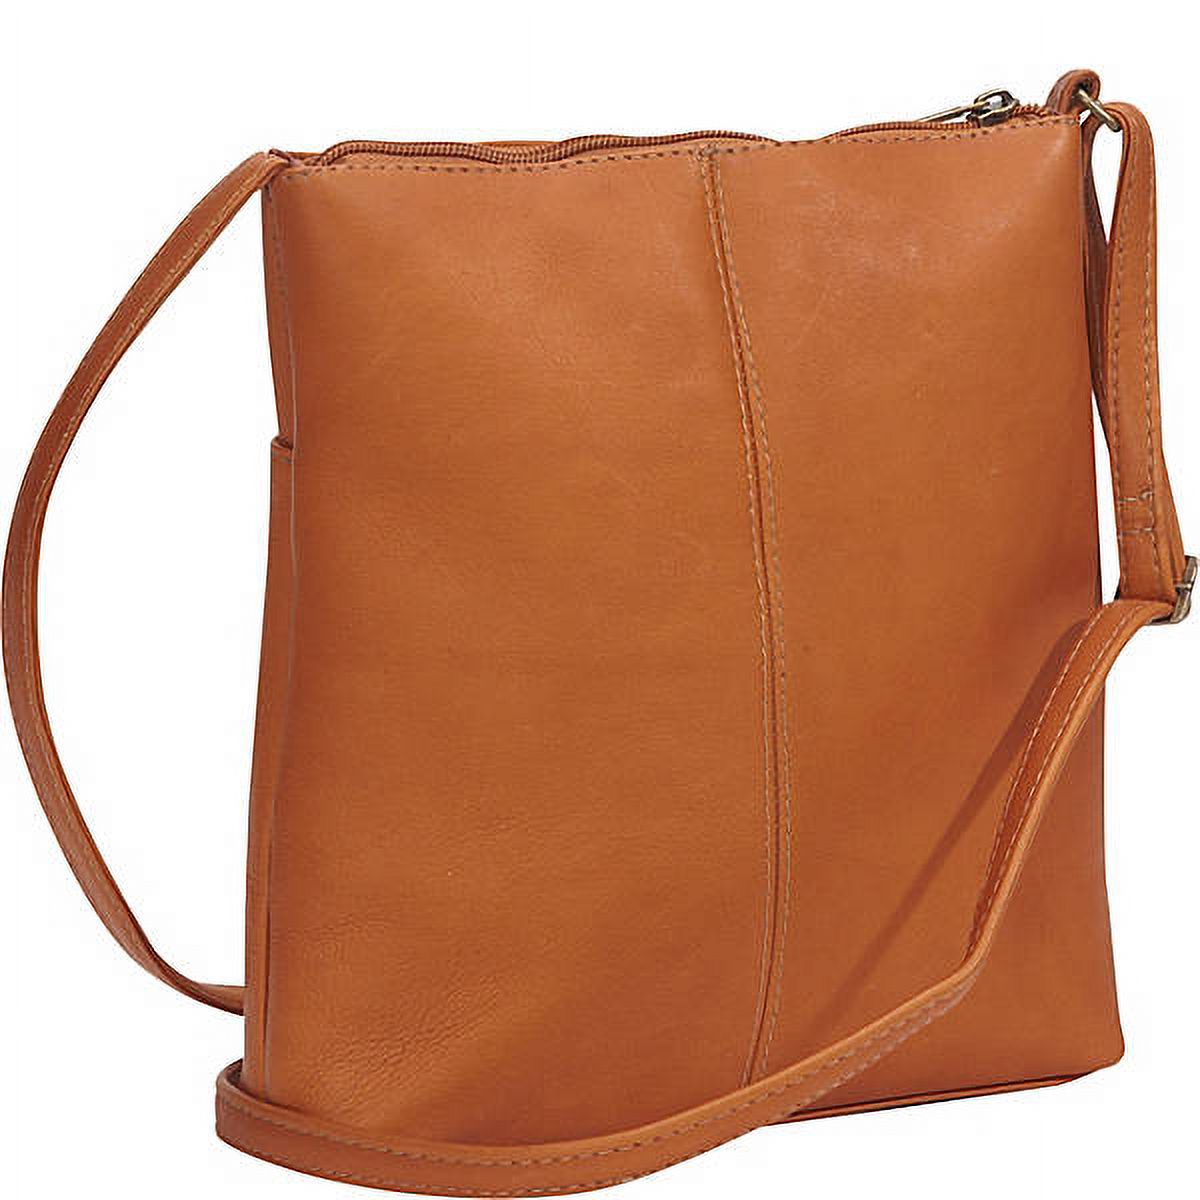 Le Donne Leather Runaway Crossbody LD-8050 - image 3 of 4